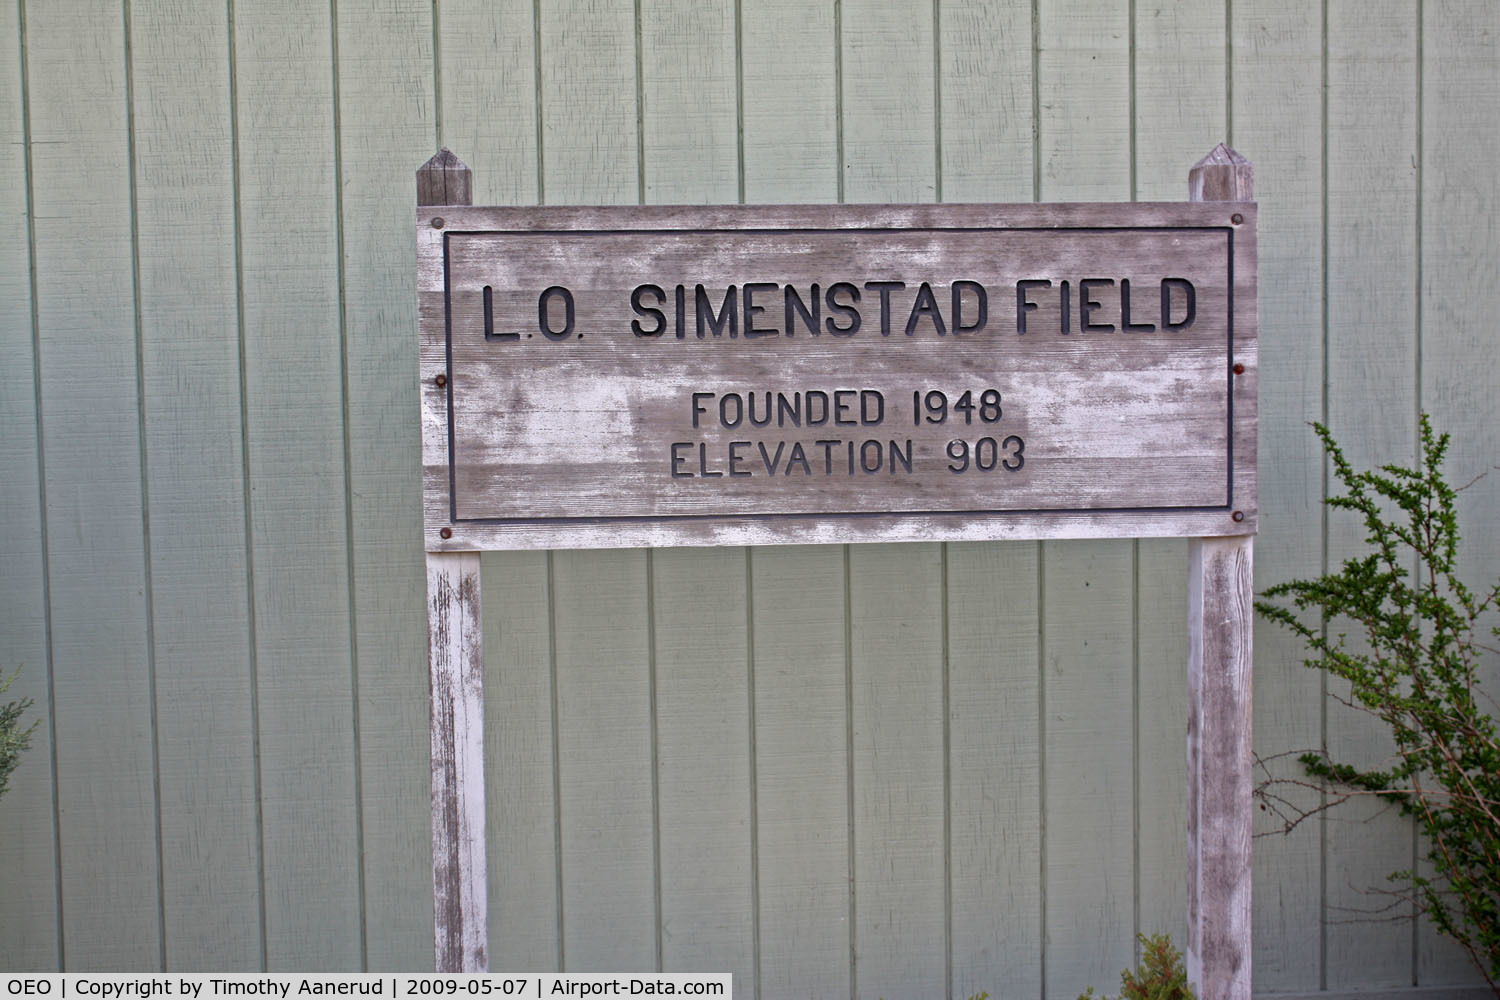 L O Simenstad Municipal Airport (OEO) - Founded in 1948